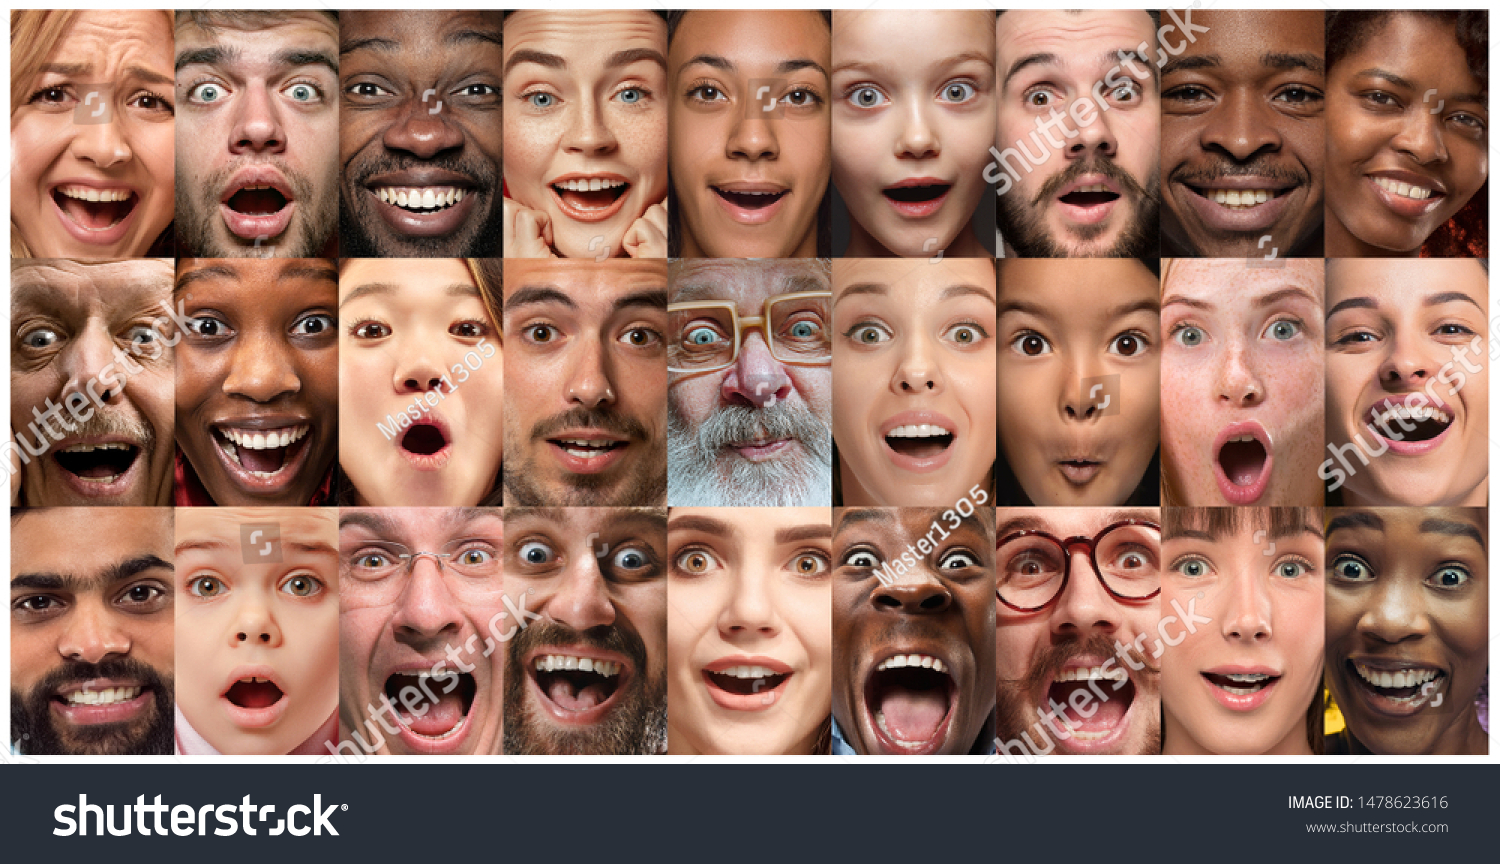 Close up portrait of young people. Human emotions, facial expression. People wondered, astonished, screaming and crazy in happiness, thinking. Creative collage made of different photos of 25 models. #1478623616